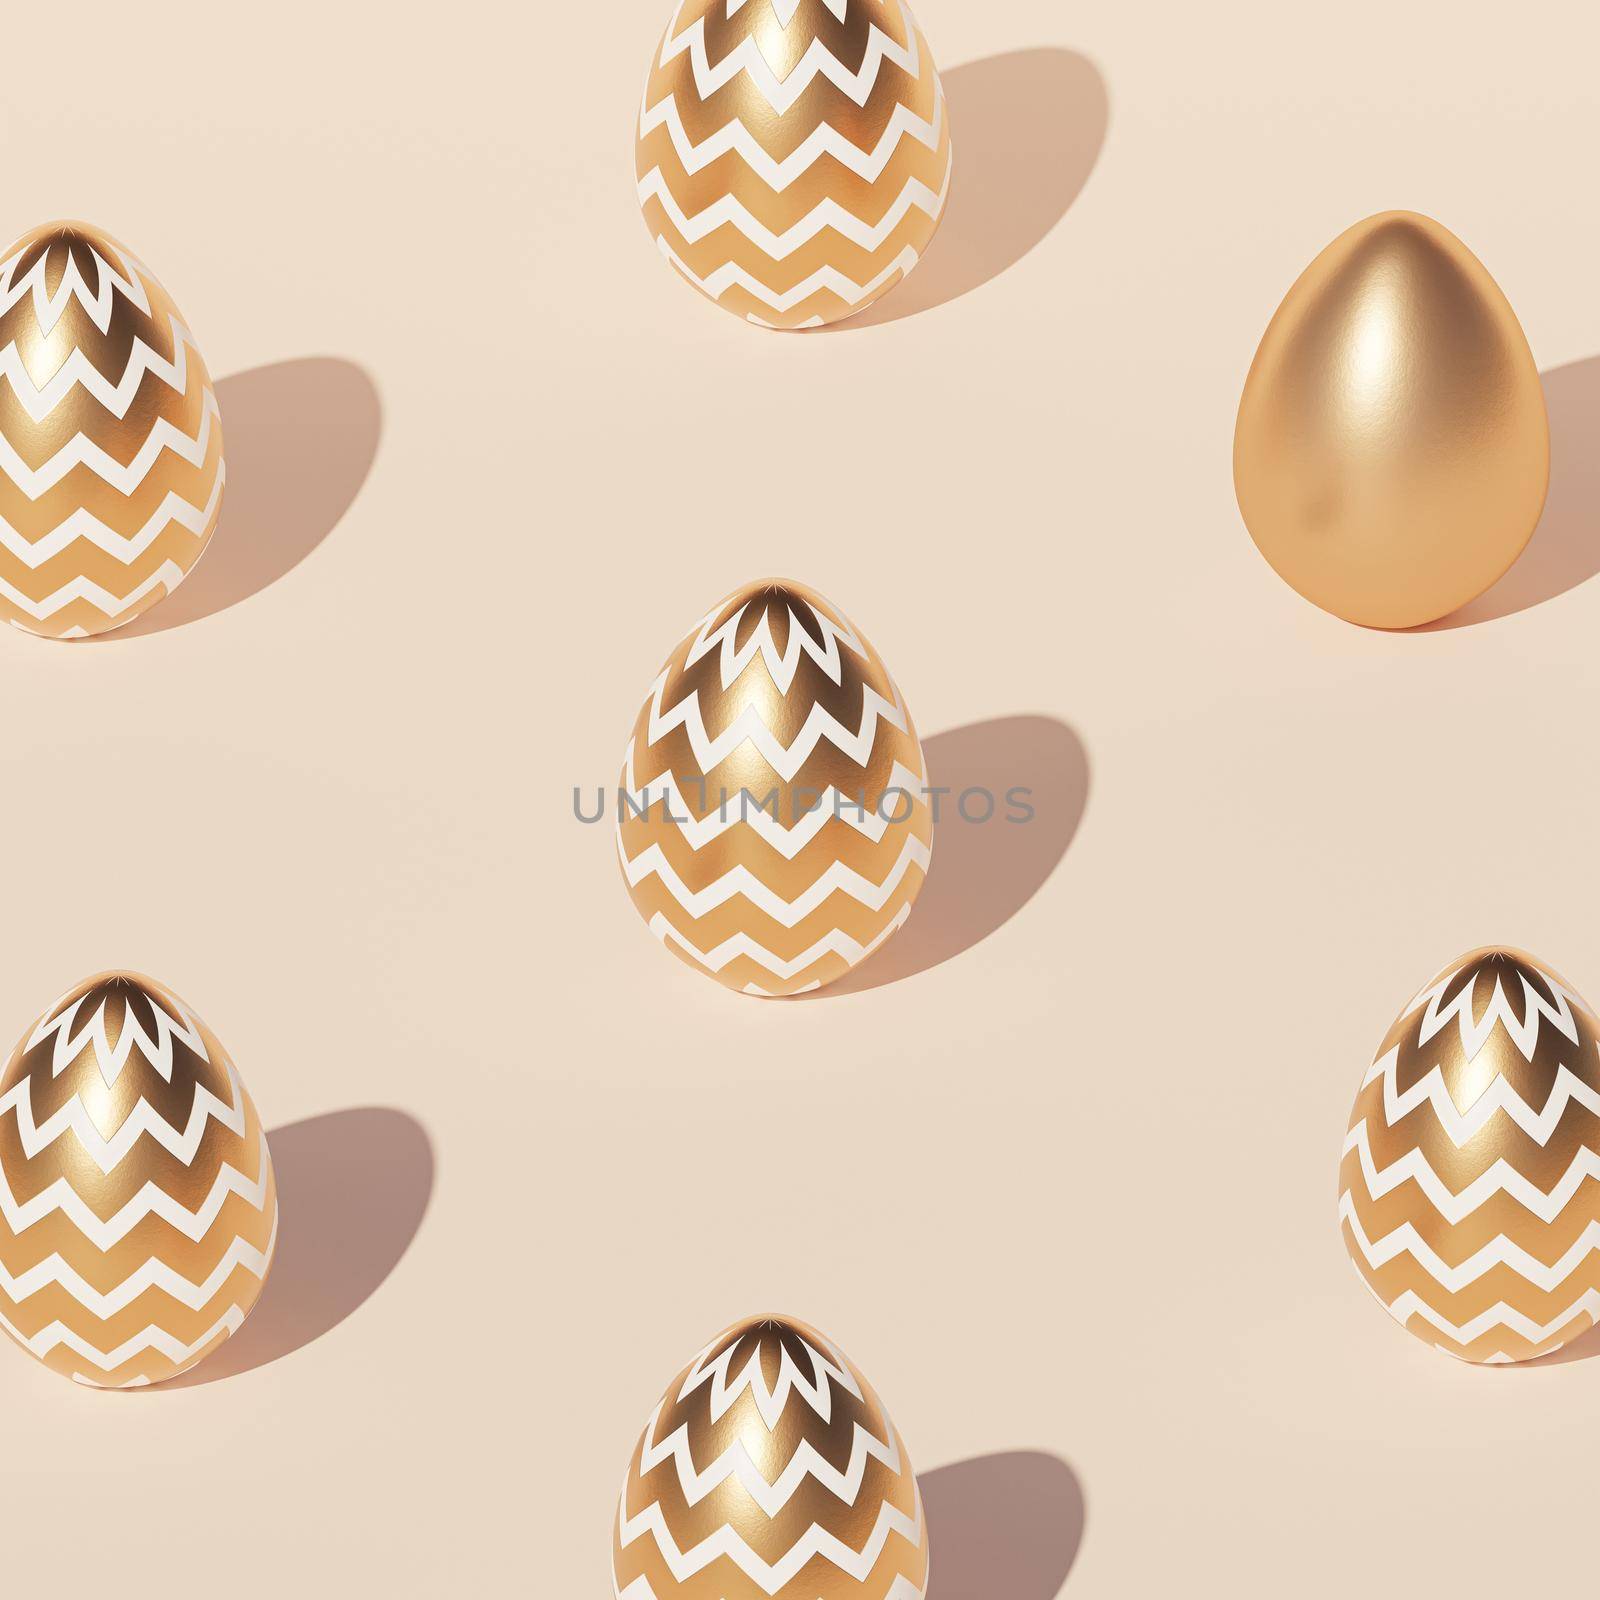 Easter eggs pattern decorated with gold, beige background, spring April holidays card, isometric 3d illustration render by Frostroomhead